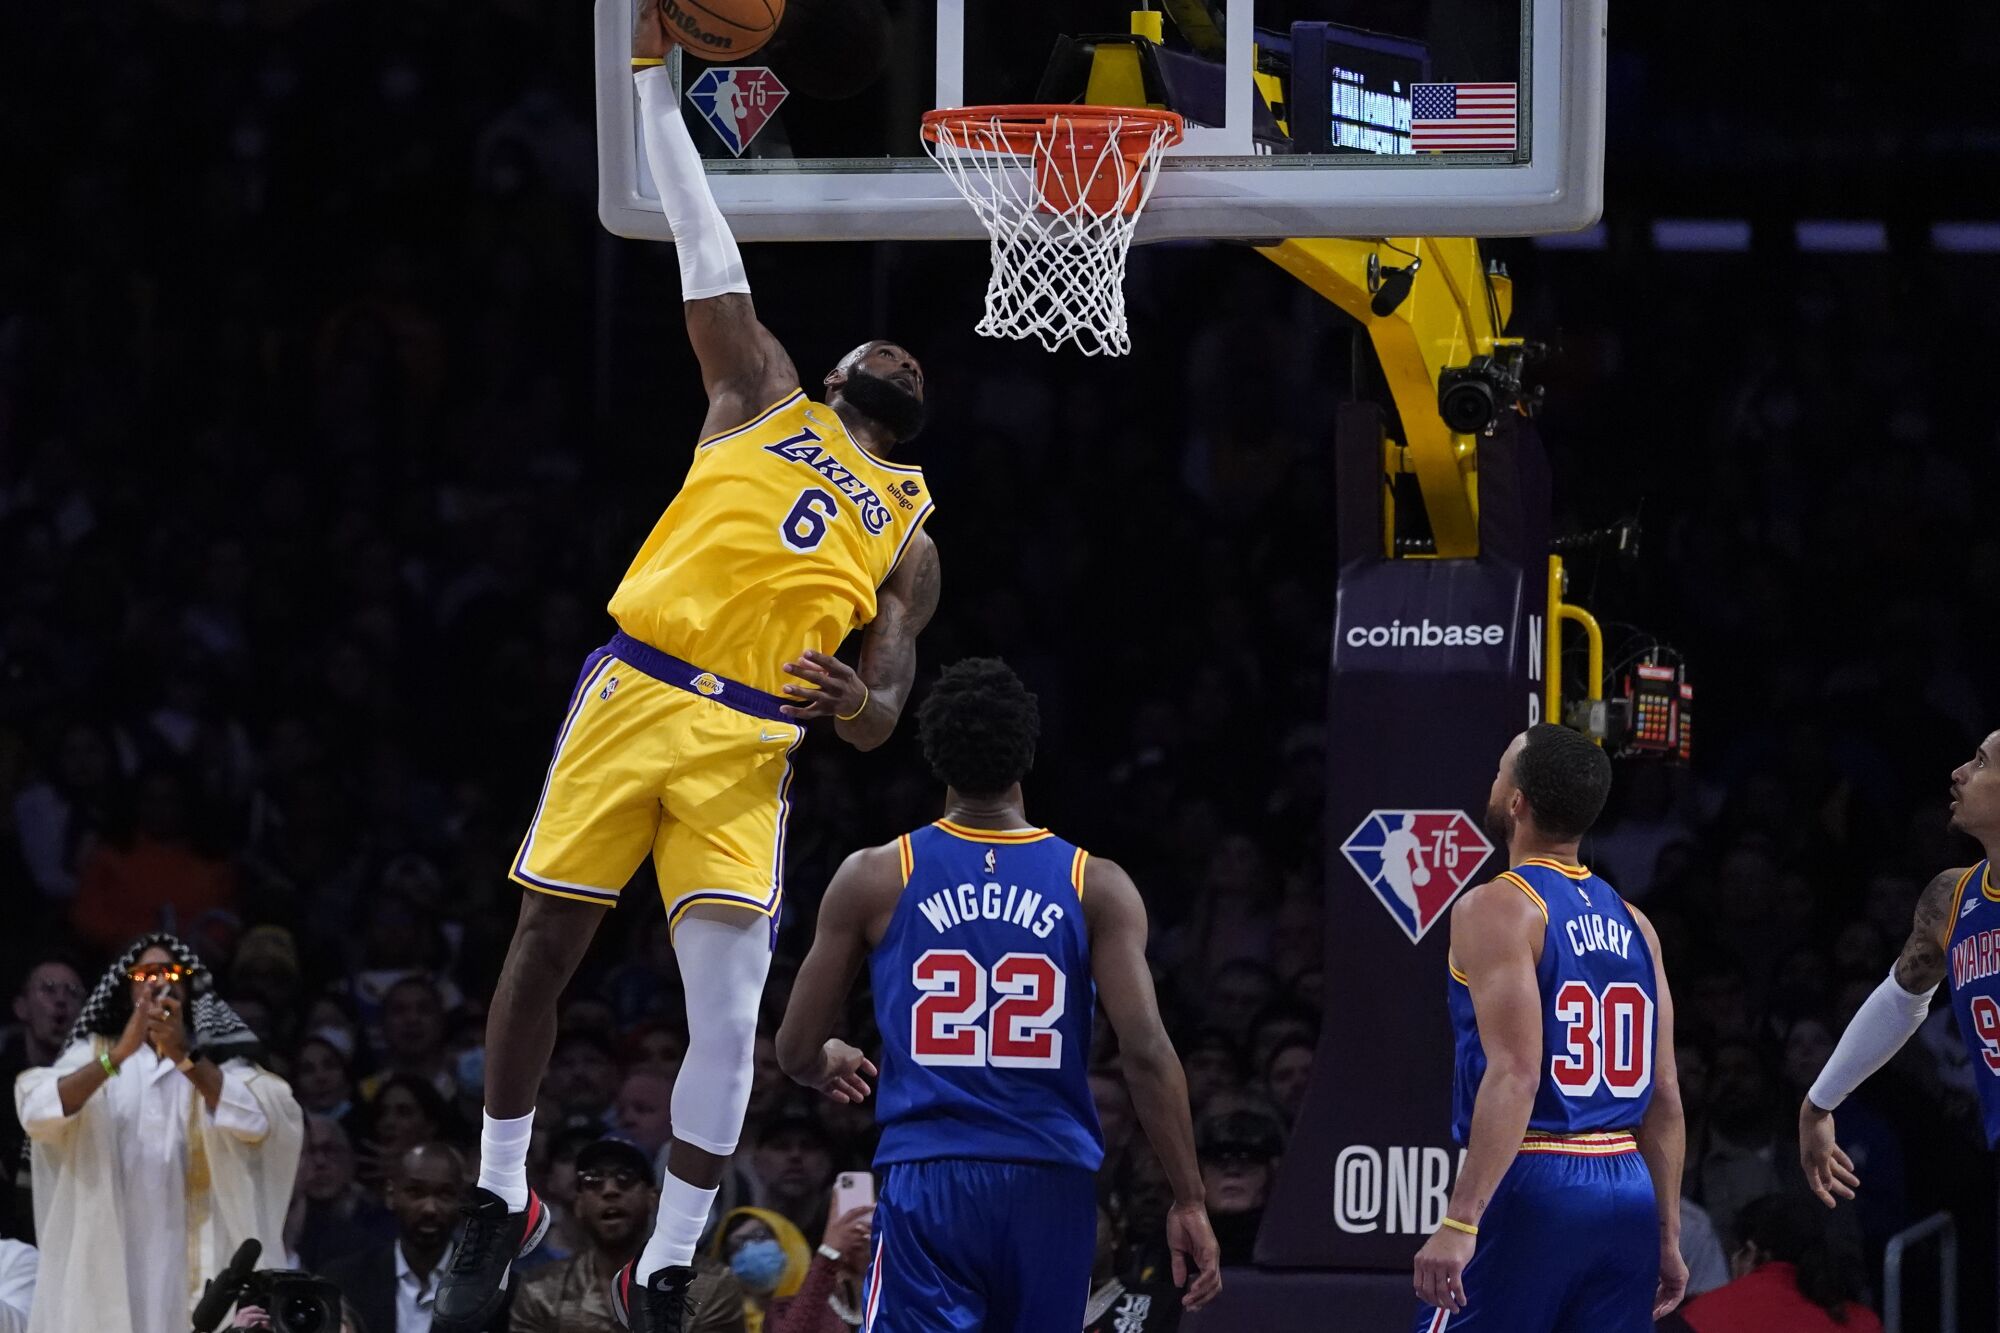 Lakers forward LeBron James elevates for a reverse dunk against the Warriors.